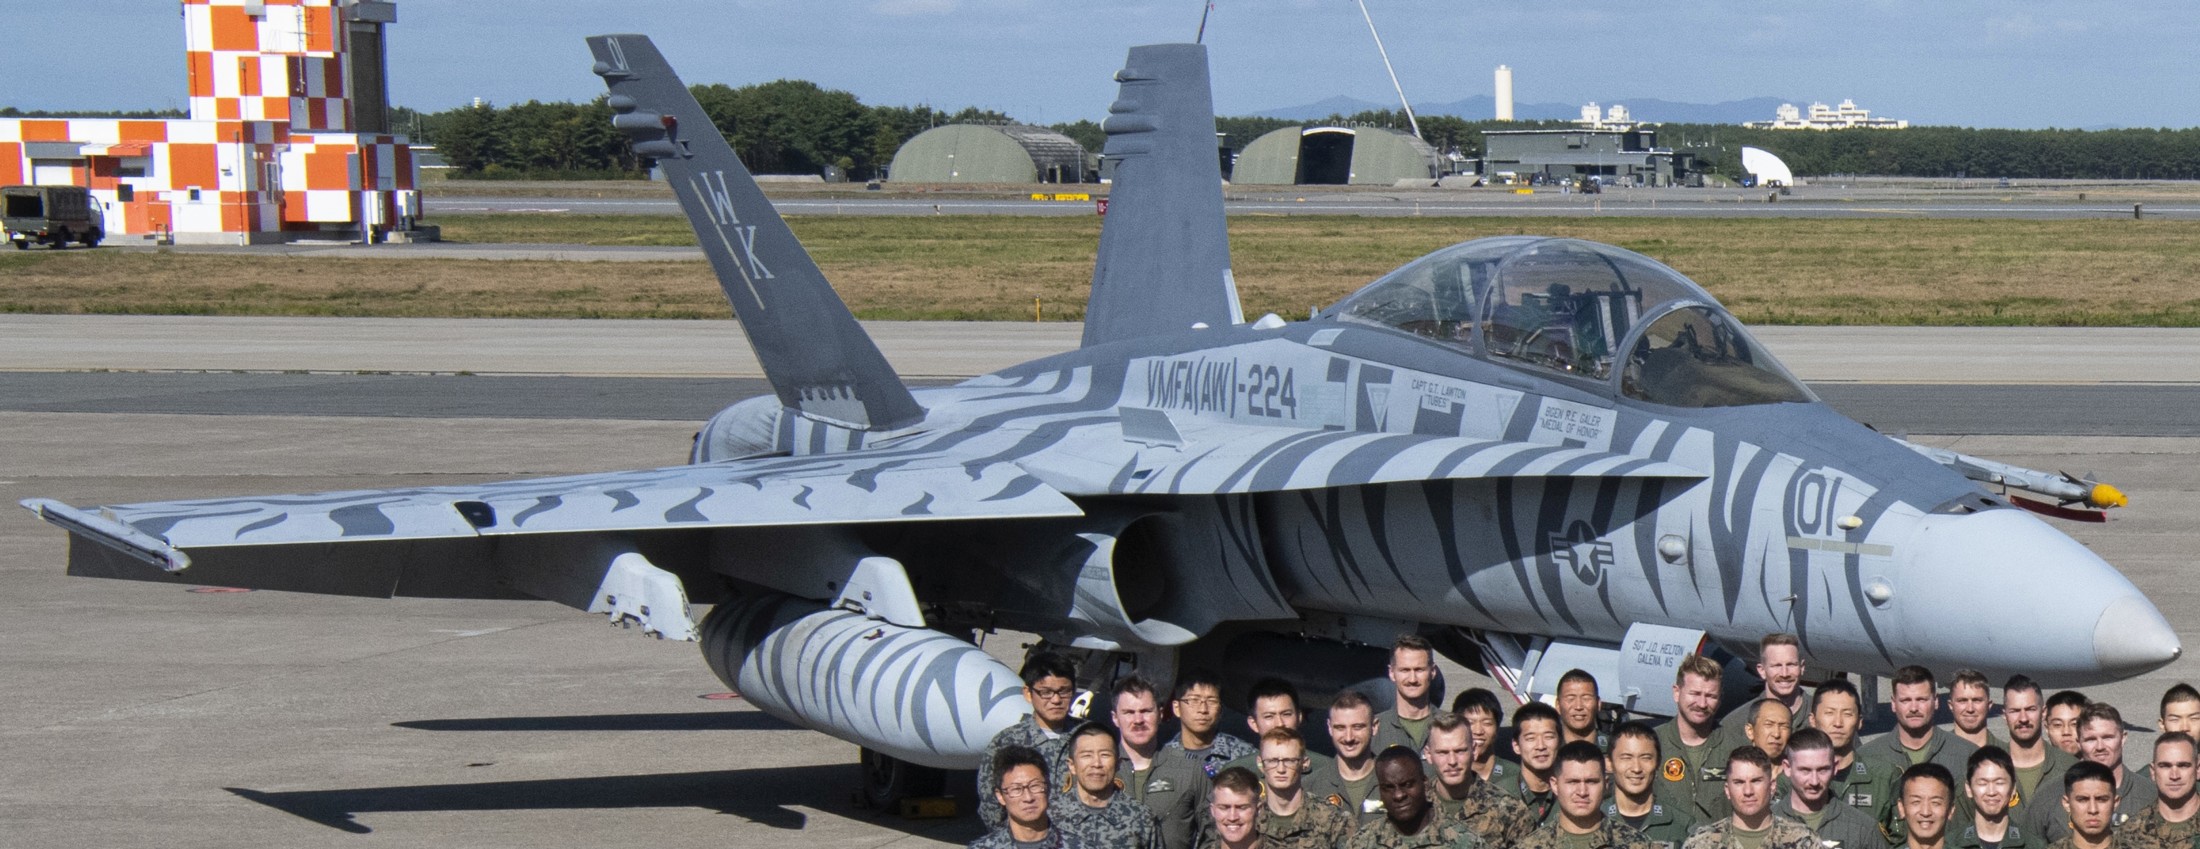 vmfa(aw)-224 bengals marine fighter attack squadron usmc f/a-18d hornet 92 misawa air base japan